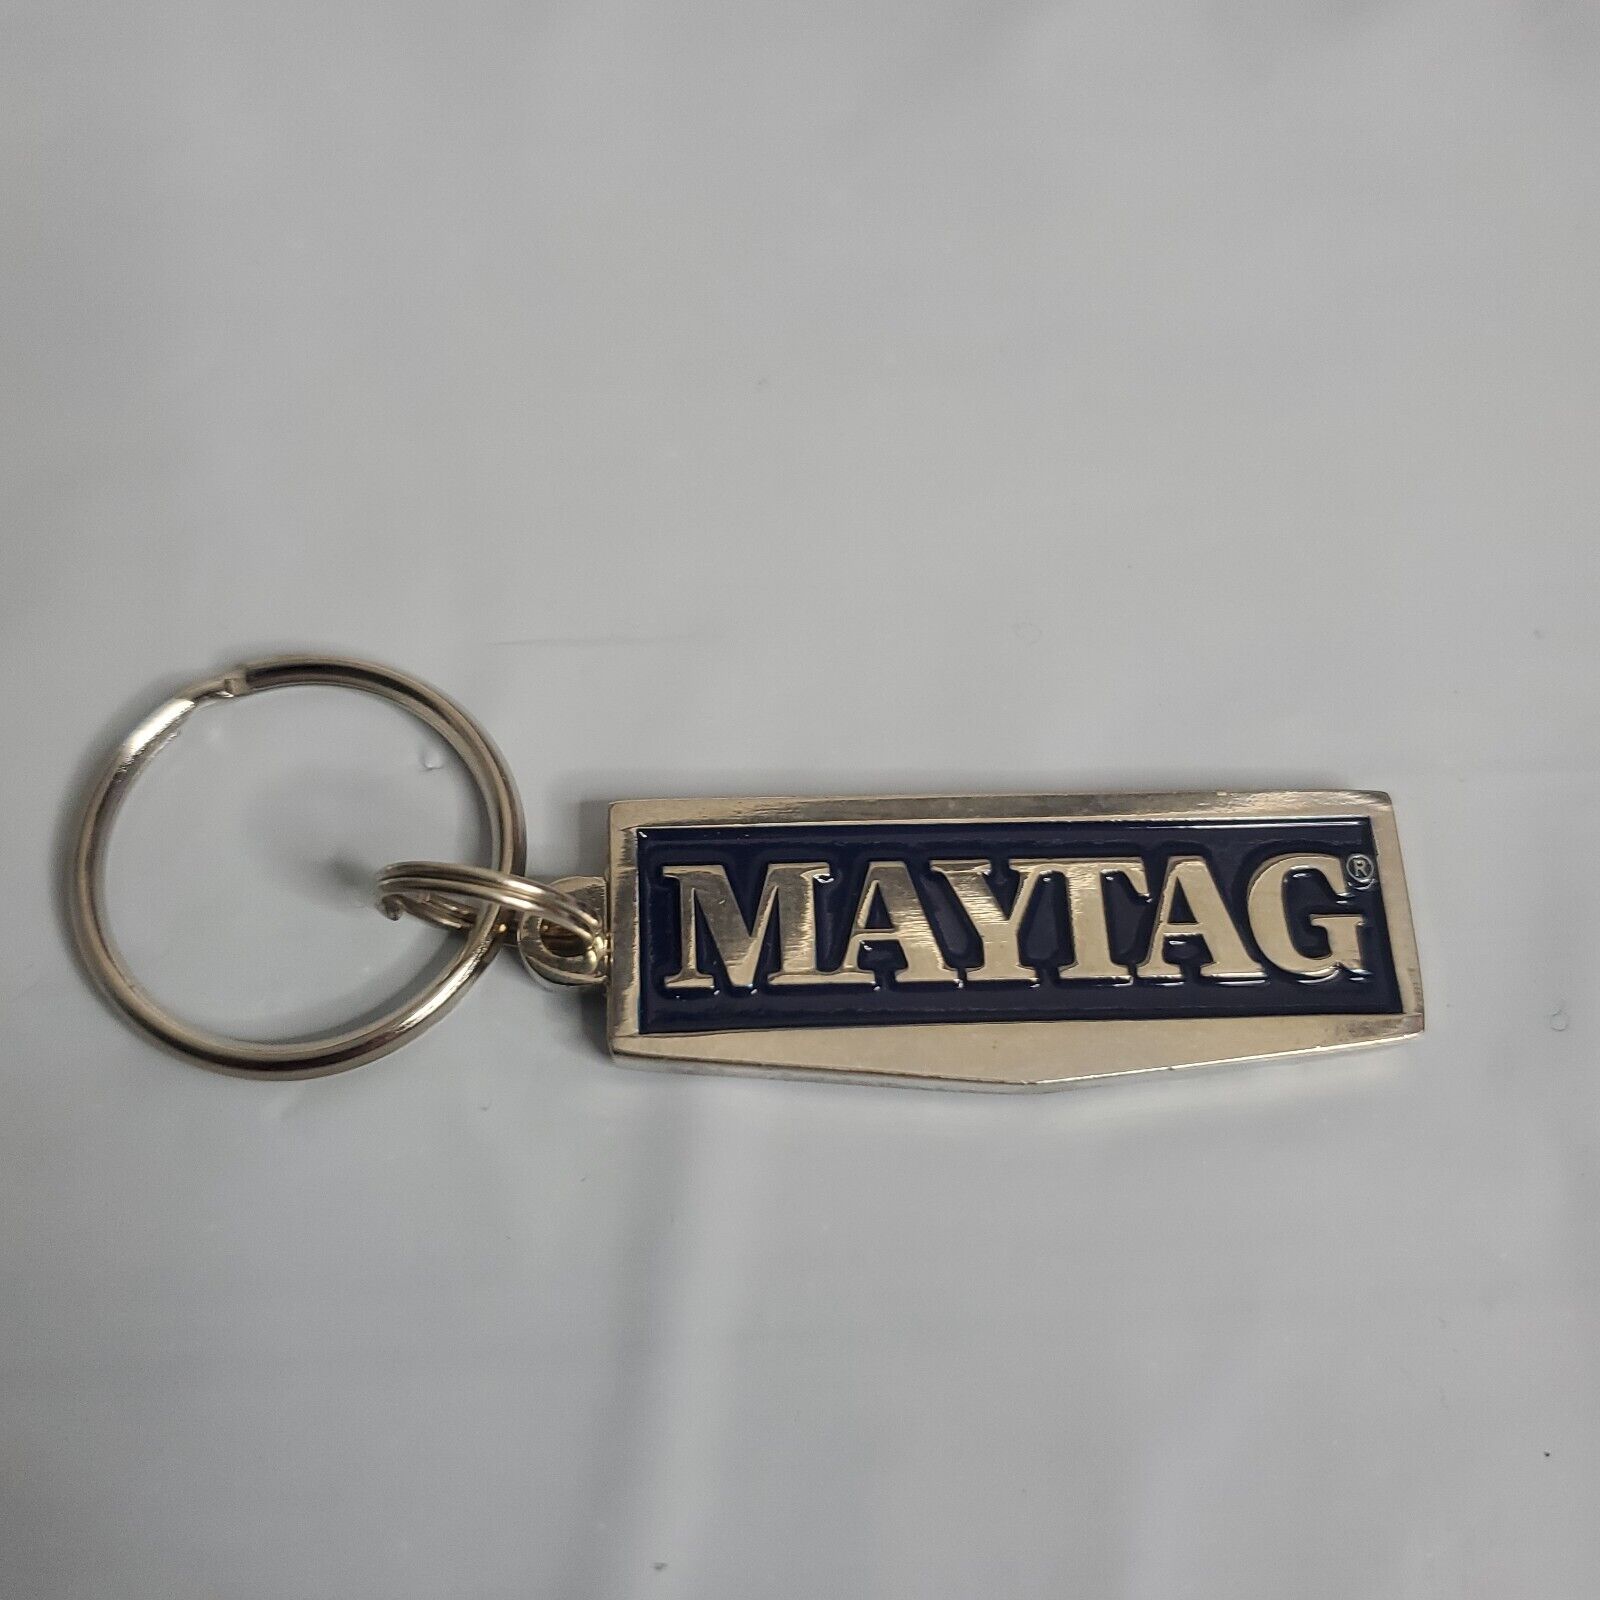 Vintage Maytag Company Keychain Service Award Collectible Advertising Chrome NEW